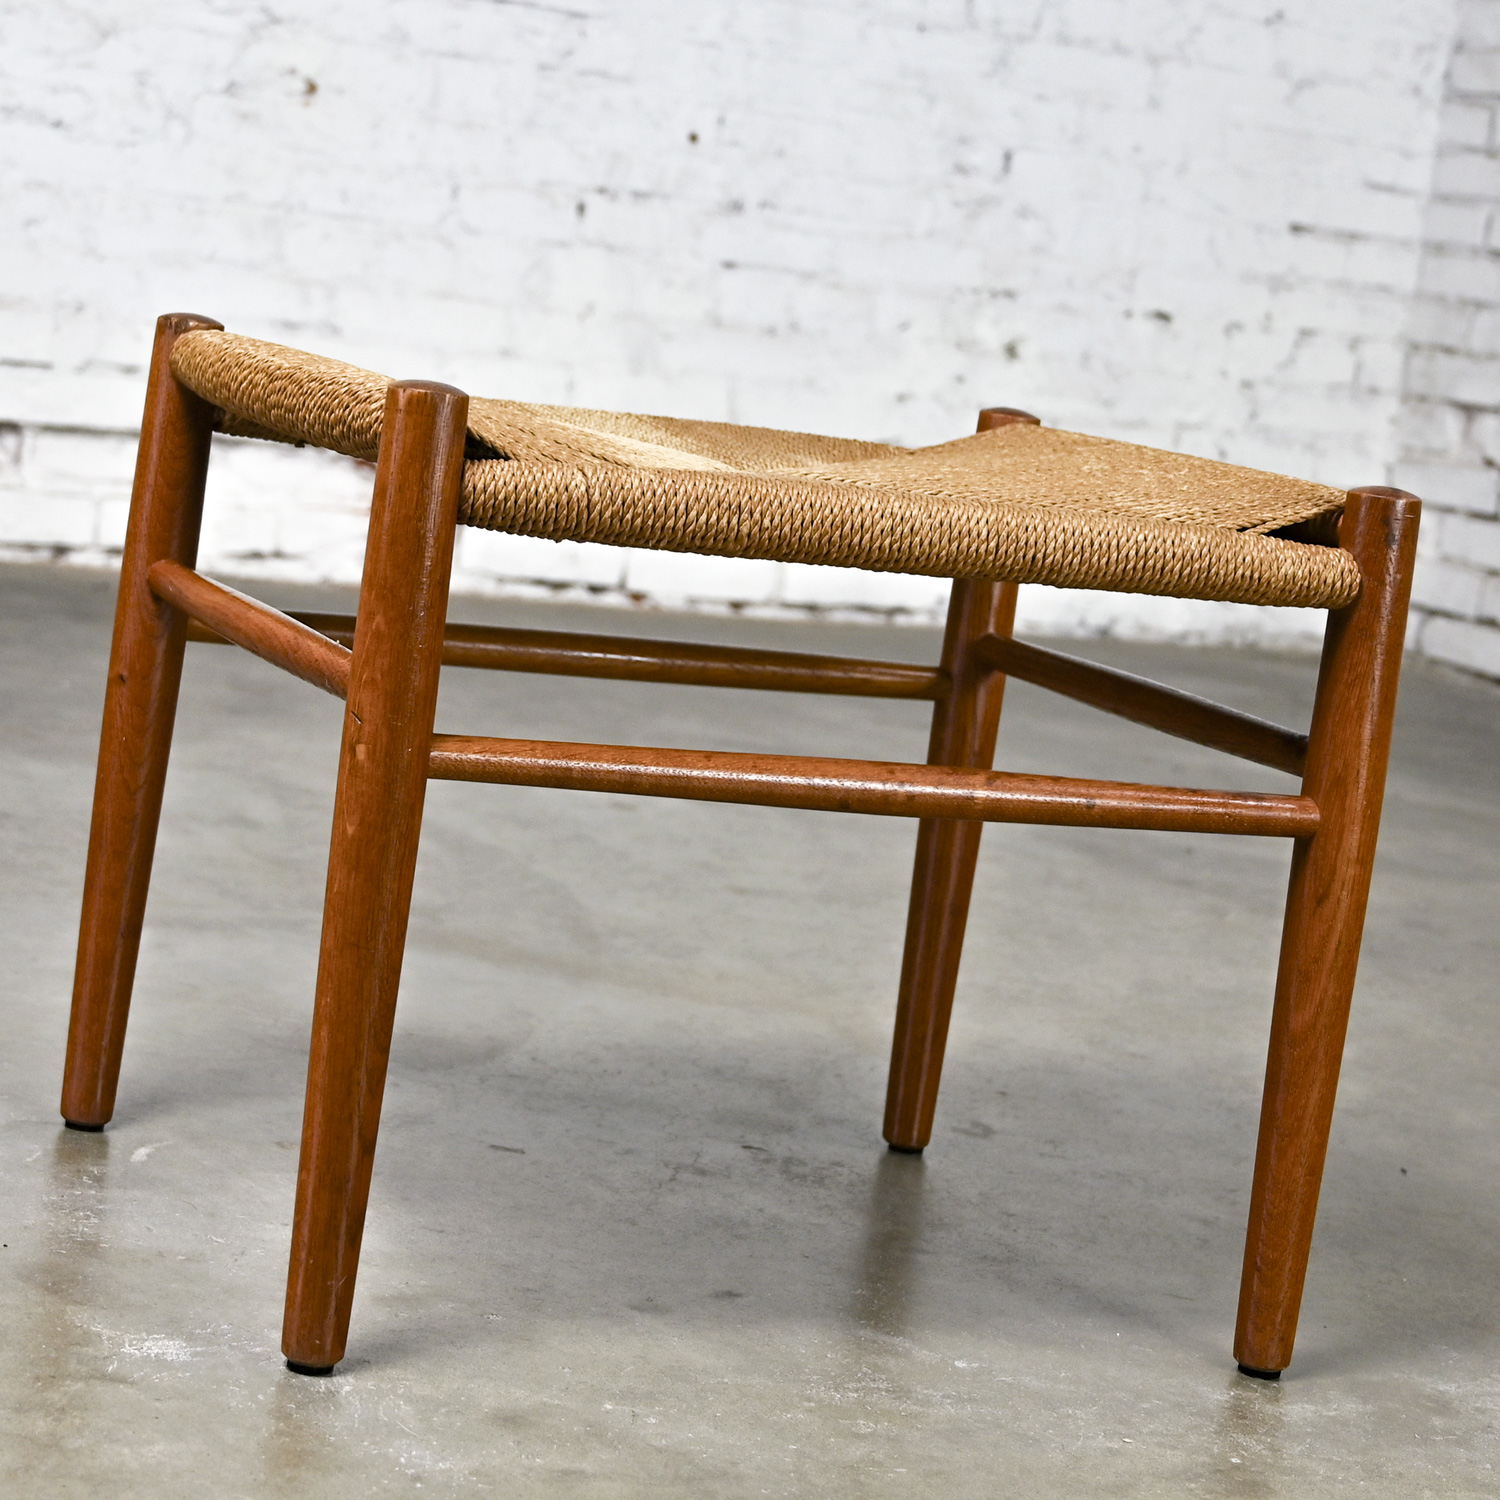 Mid-20th Century Scandinavian Modern Low Stool Teak with Natural Paper Cord Woven Seat